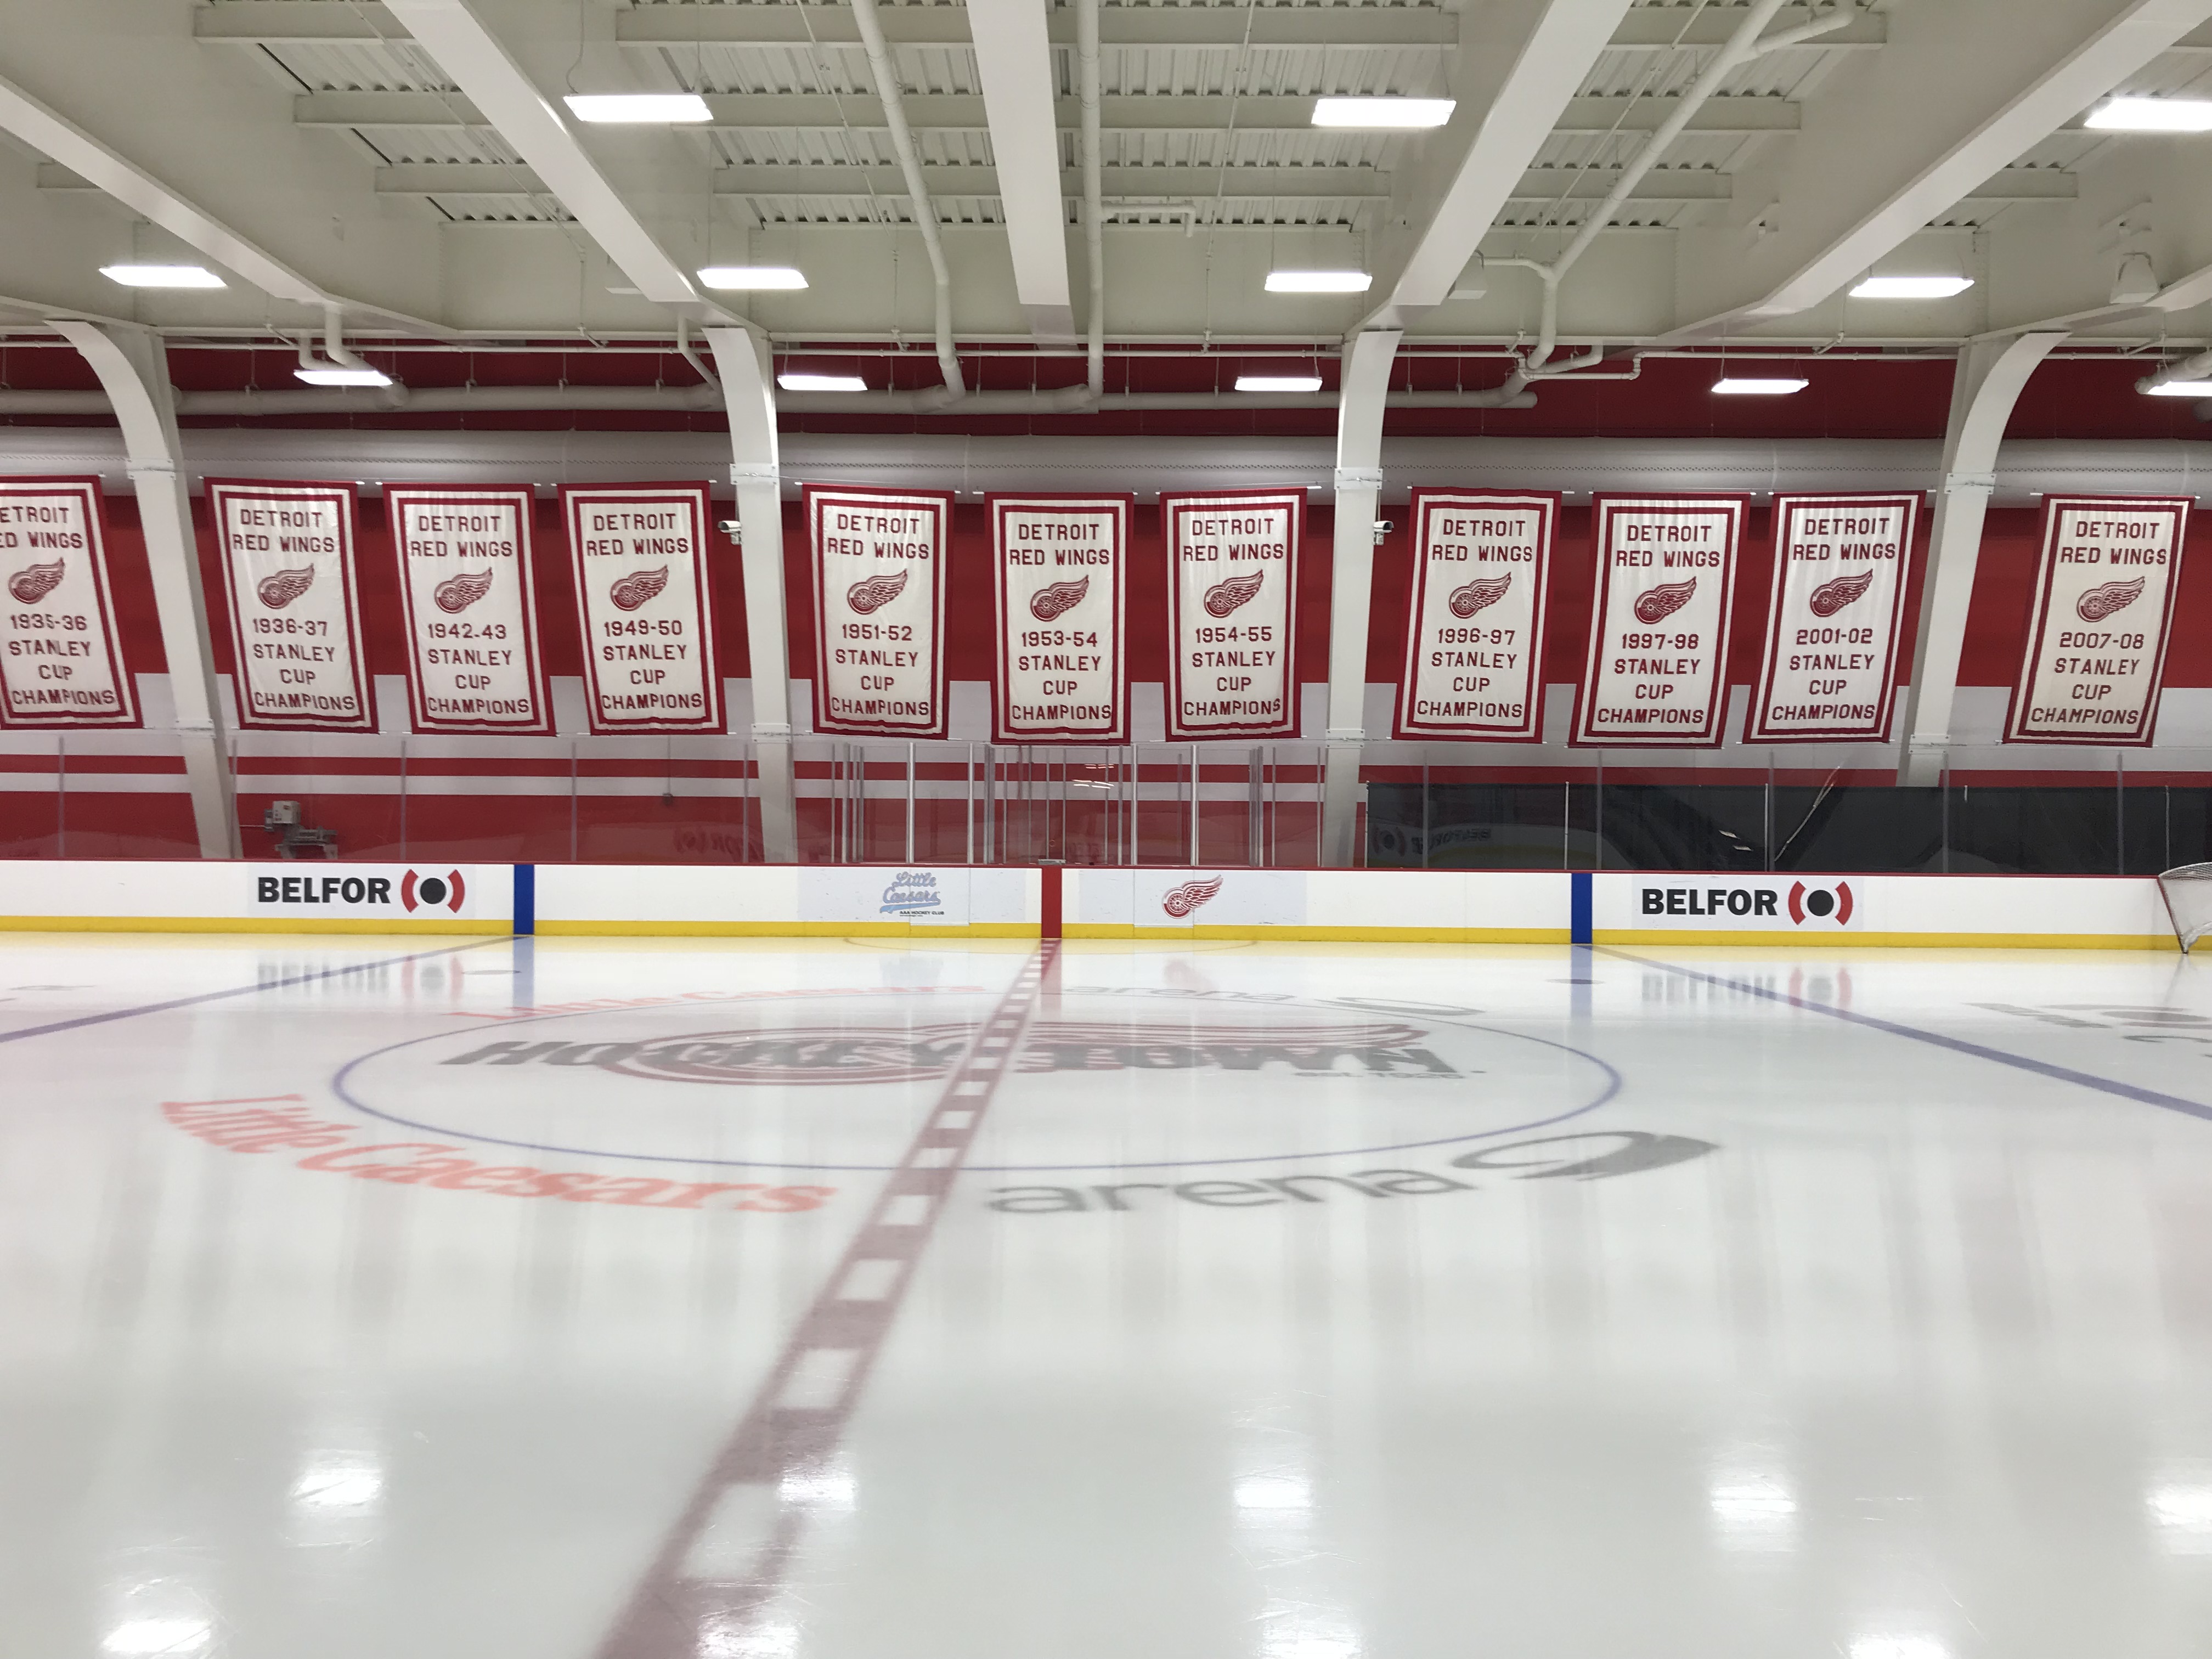 Little Caesars Arena, section M4, home of Detroit Pistons, Detroit Red Wings,  page 1